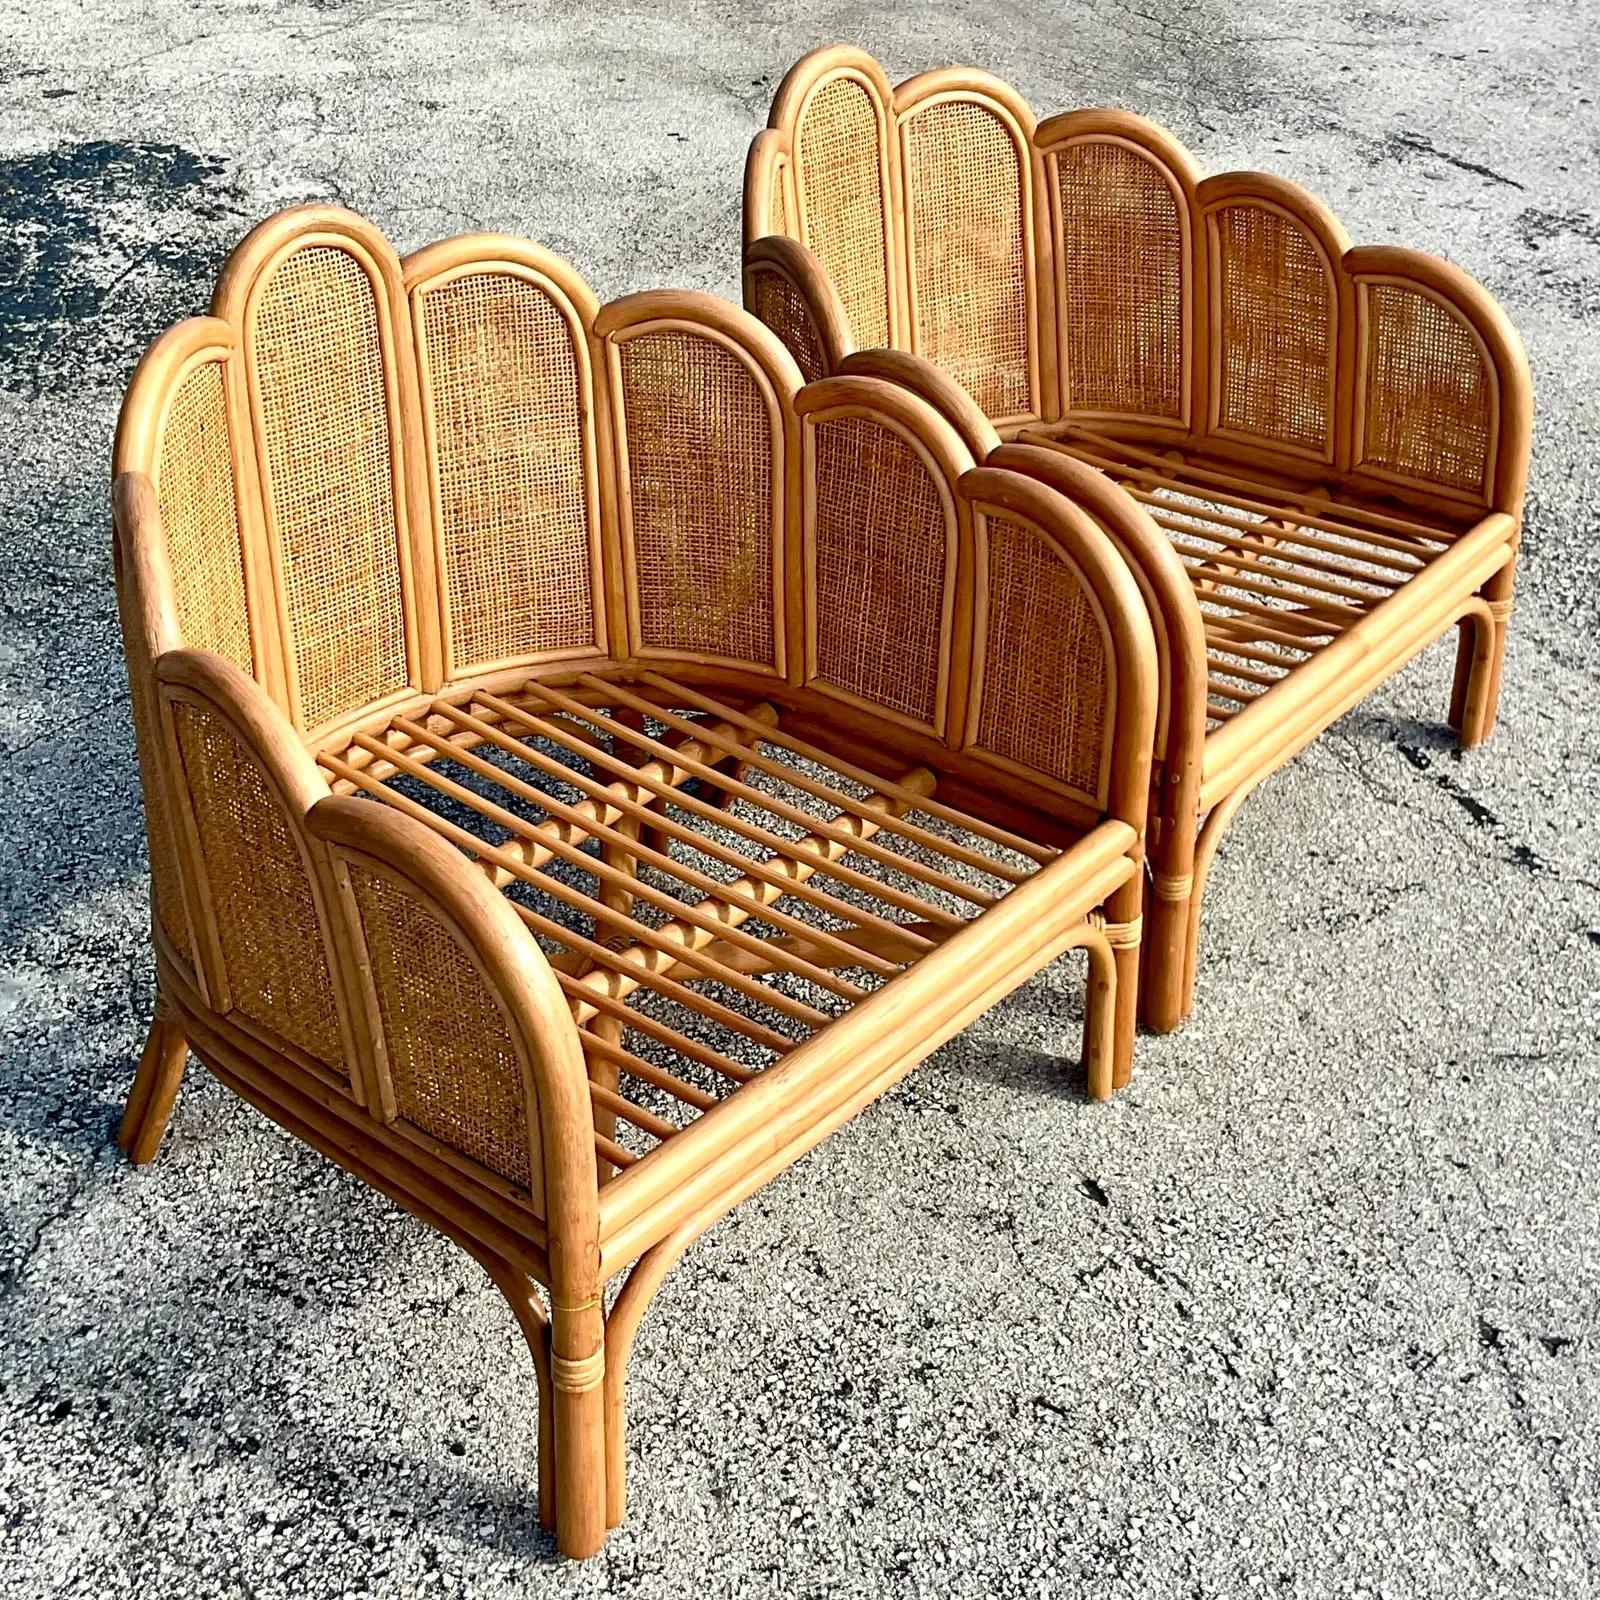 20th Century Contemporary Coastal Scalloped Cane Rattan Lounge Chairs, Pair